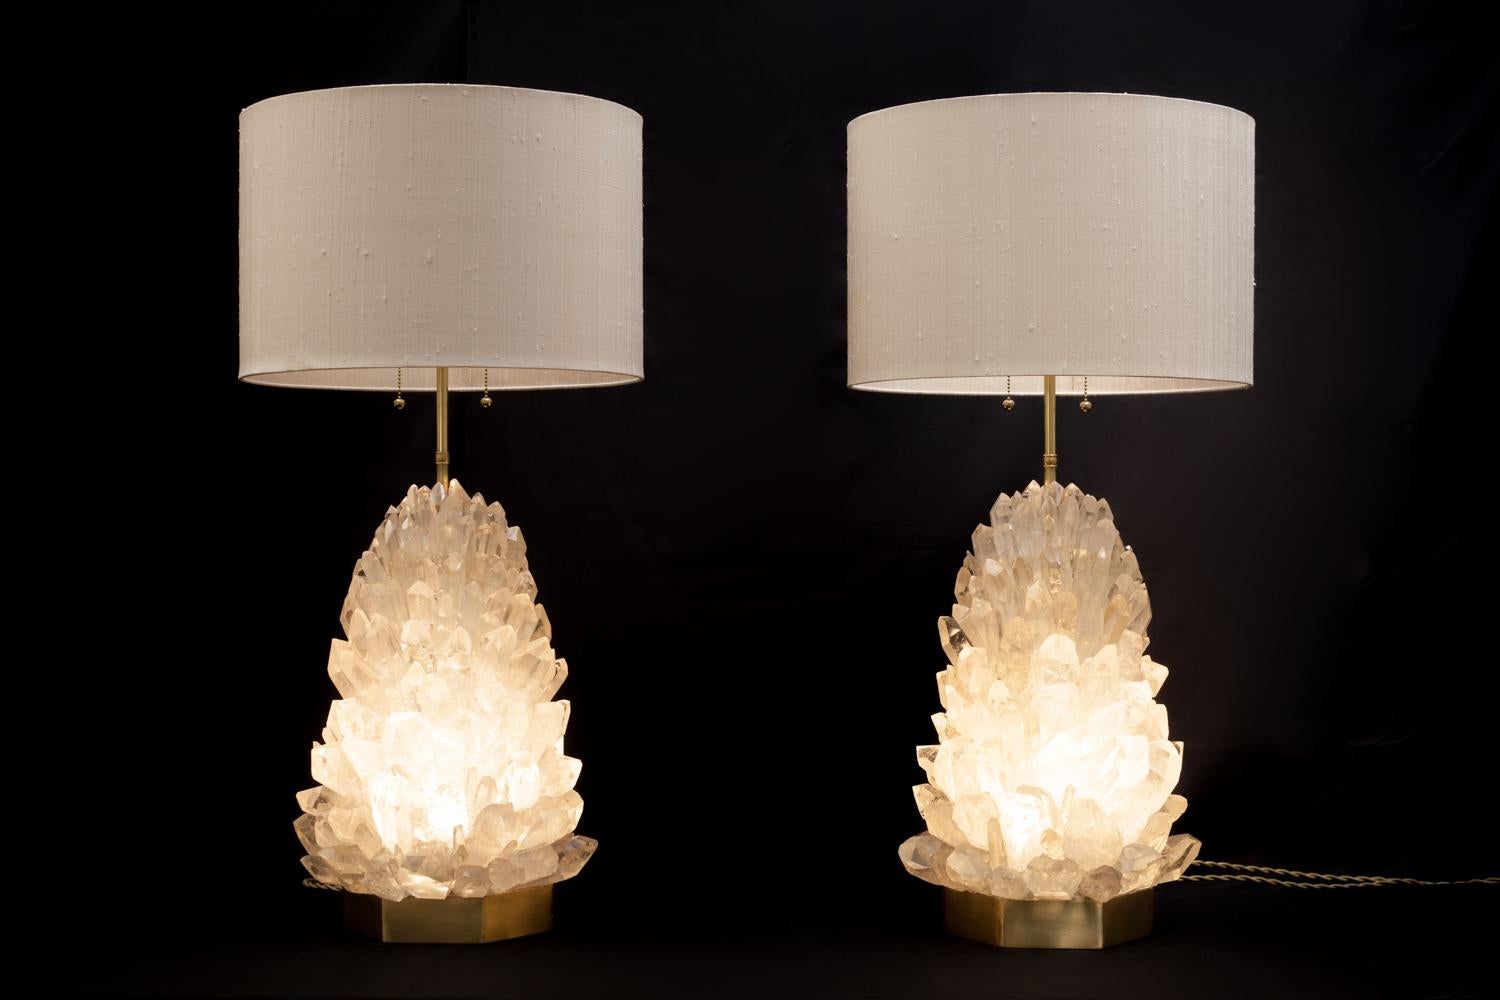 Brazilian Pair of Natural Crystal Table Lamps, Signed by Demian Quincke